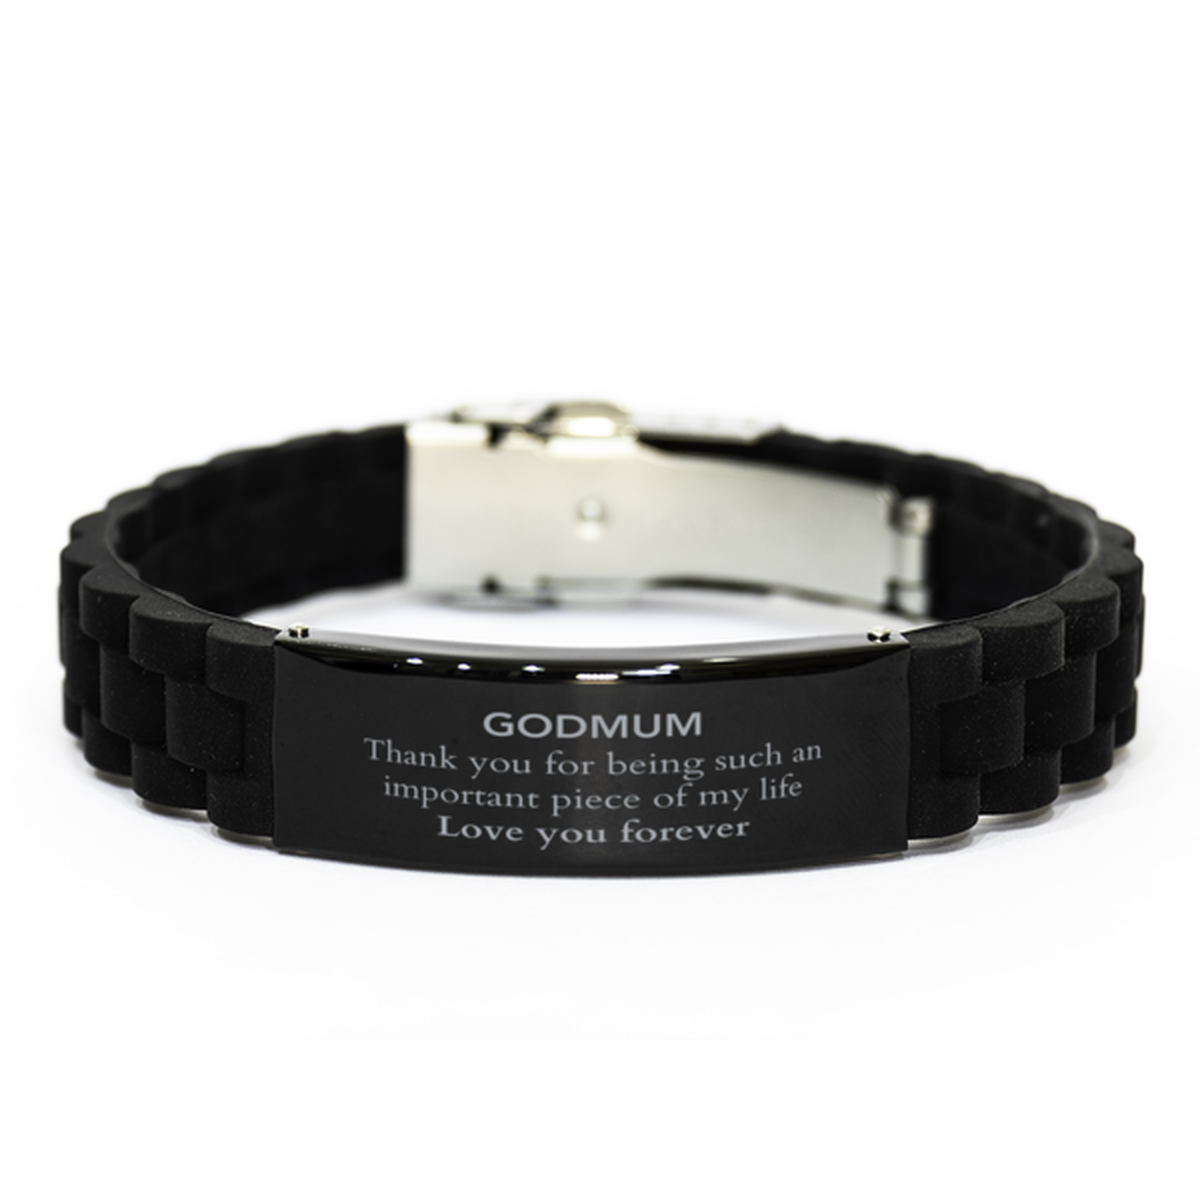 Appropriate Godmum Black Glidelock Clasp Bracelet Epic Birthday Gifts for Godmum Thank you for being such an important piece of my life Godmum Christmas Mothers Fathers Day